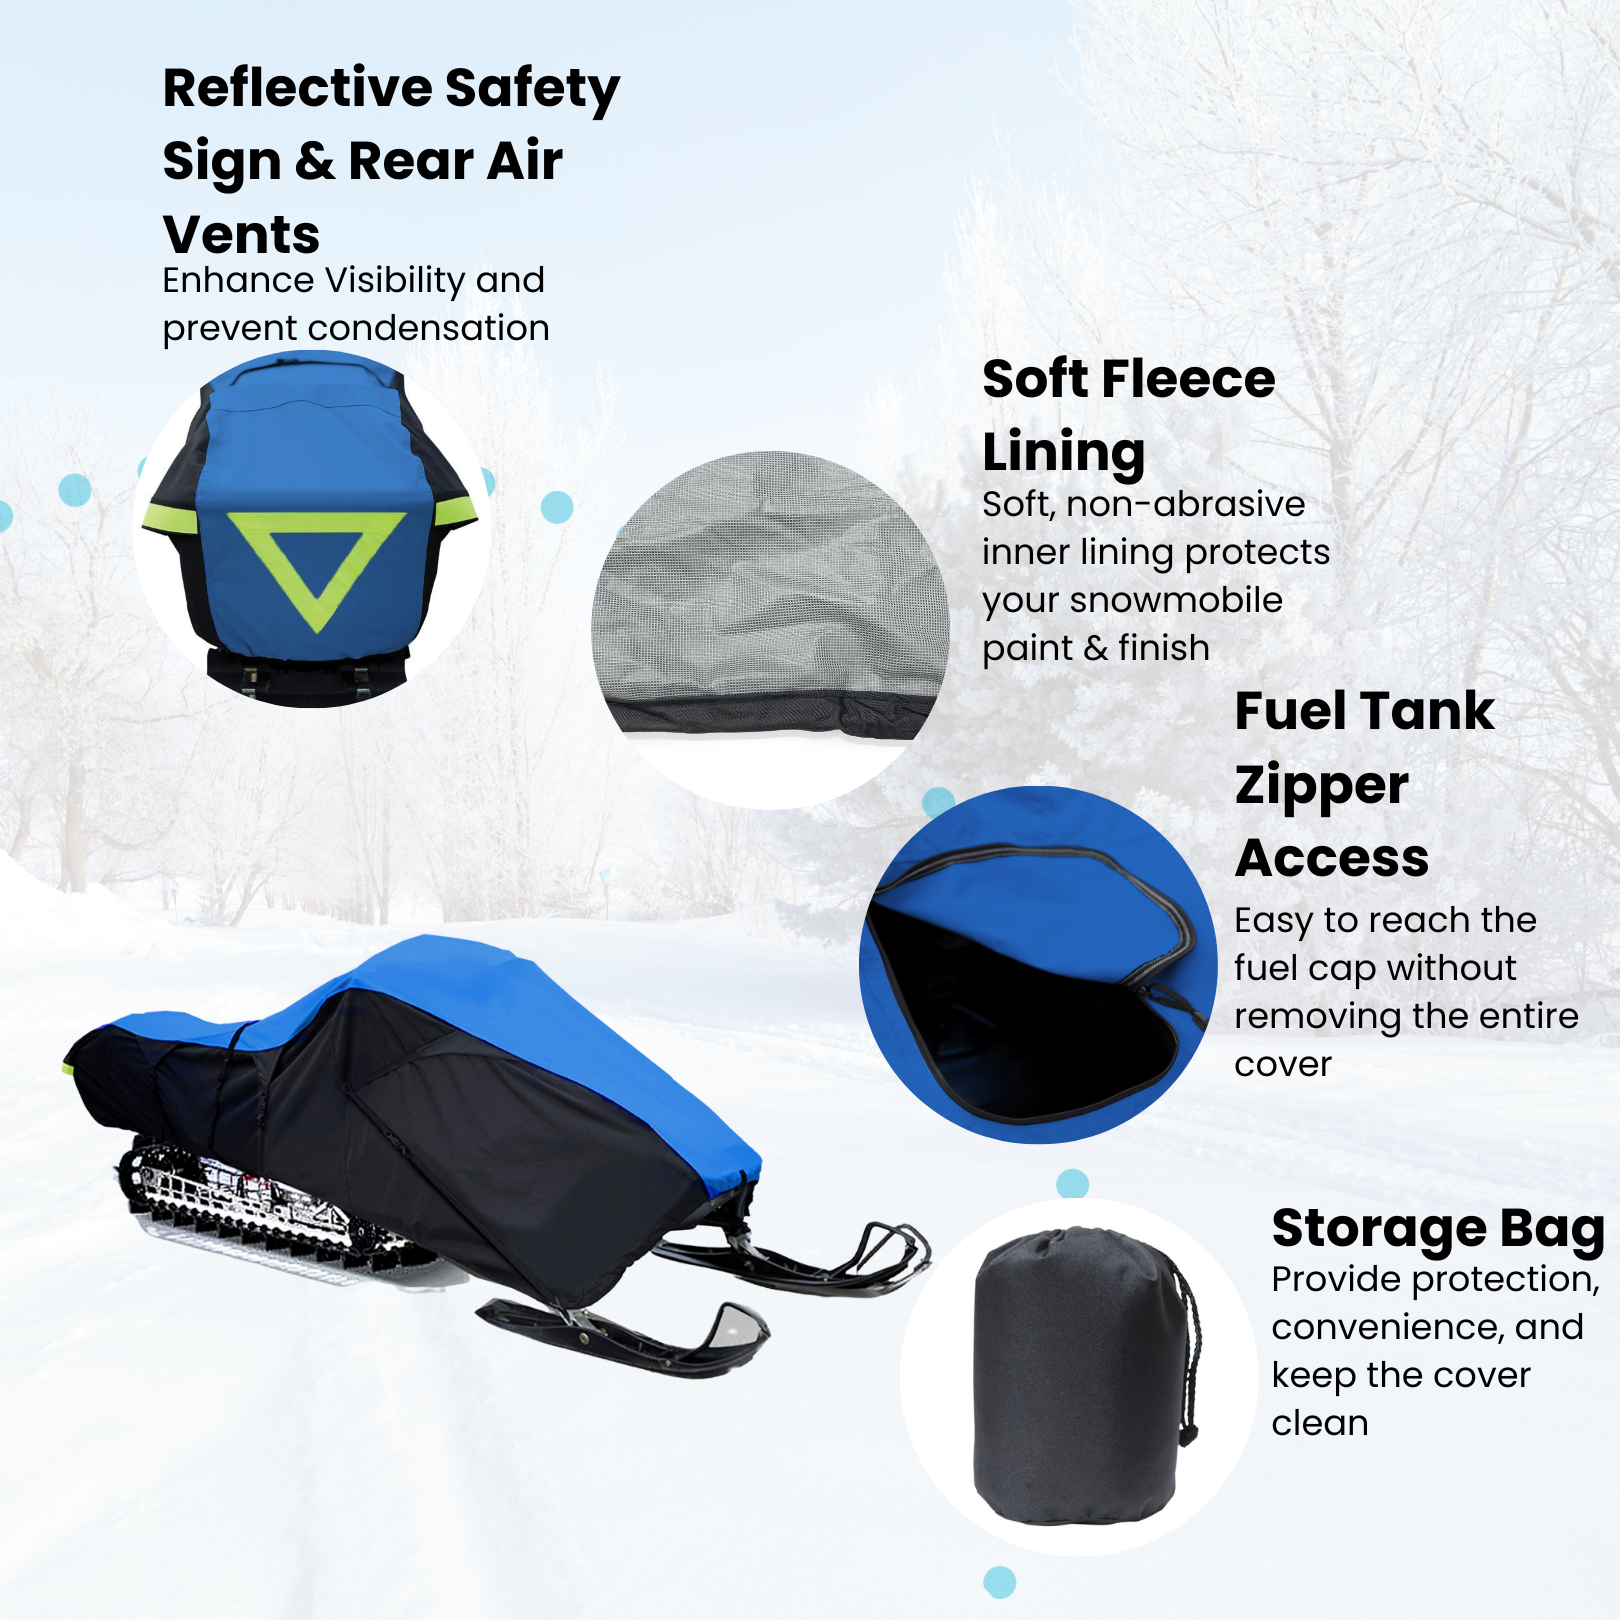 EliteShield Heavy Duty Trailerable Snowmobile Storage Cover Fits Youth Snowmobile up to 80" Blue/Black - image 3 of 7